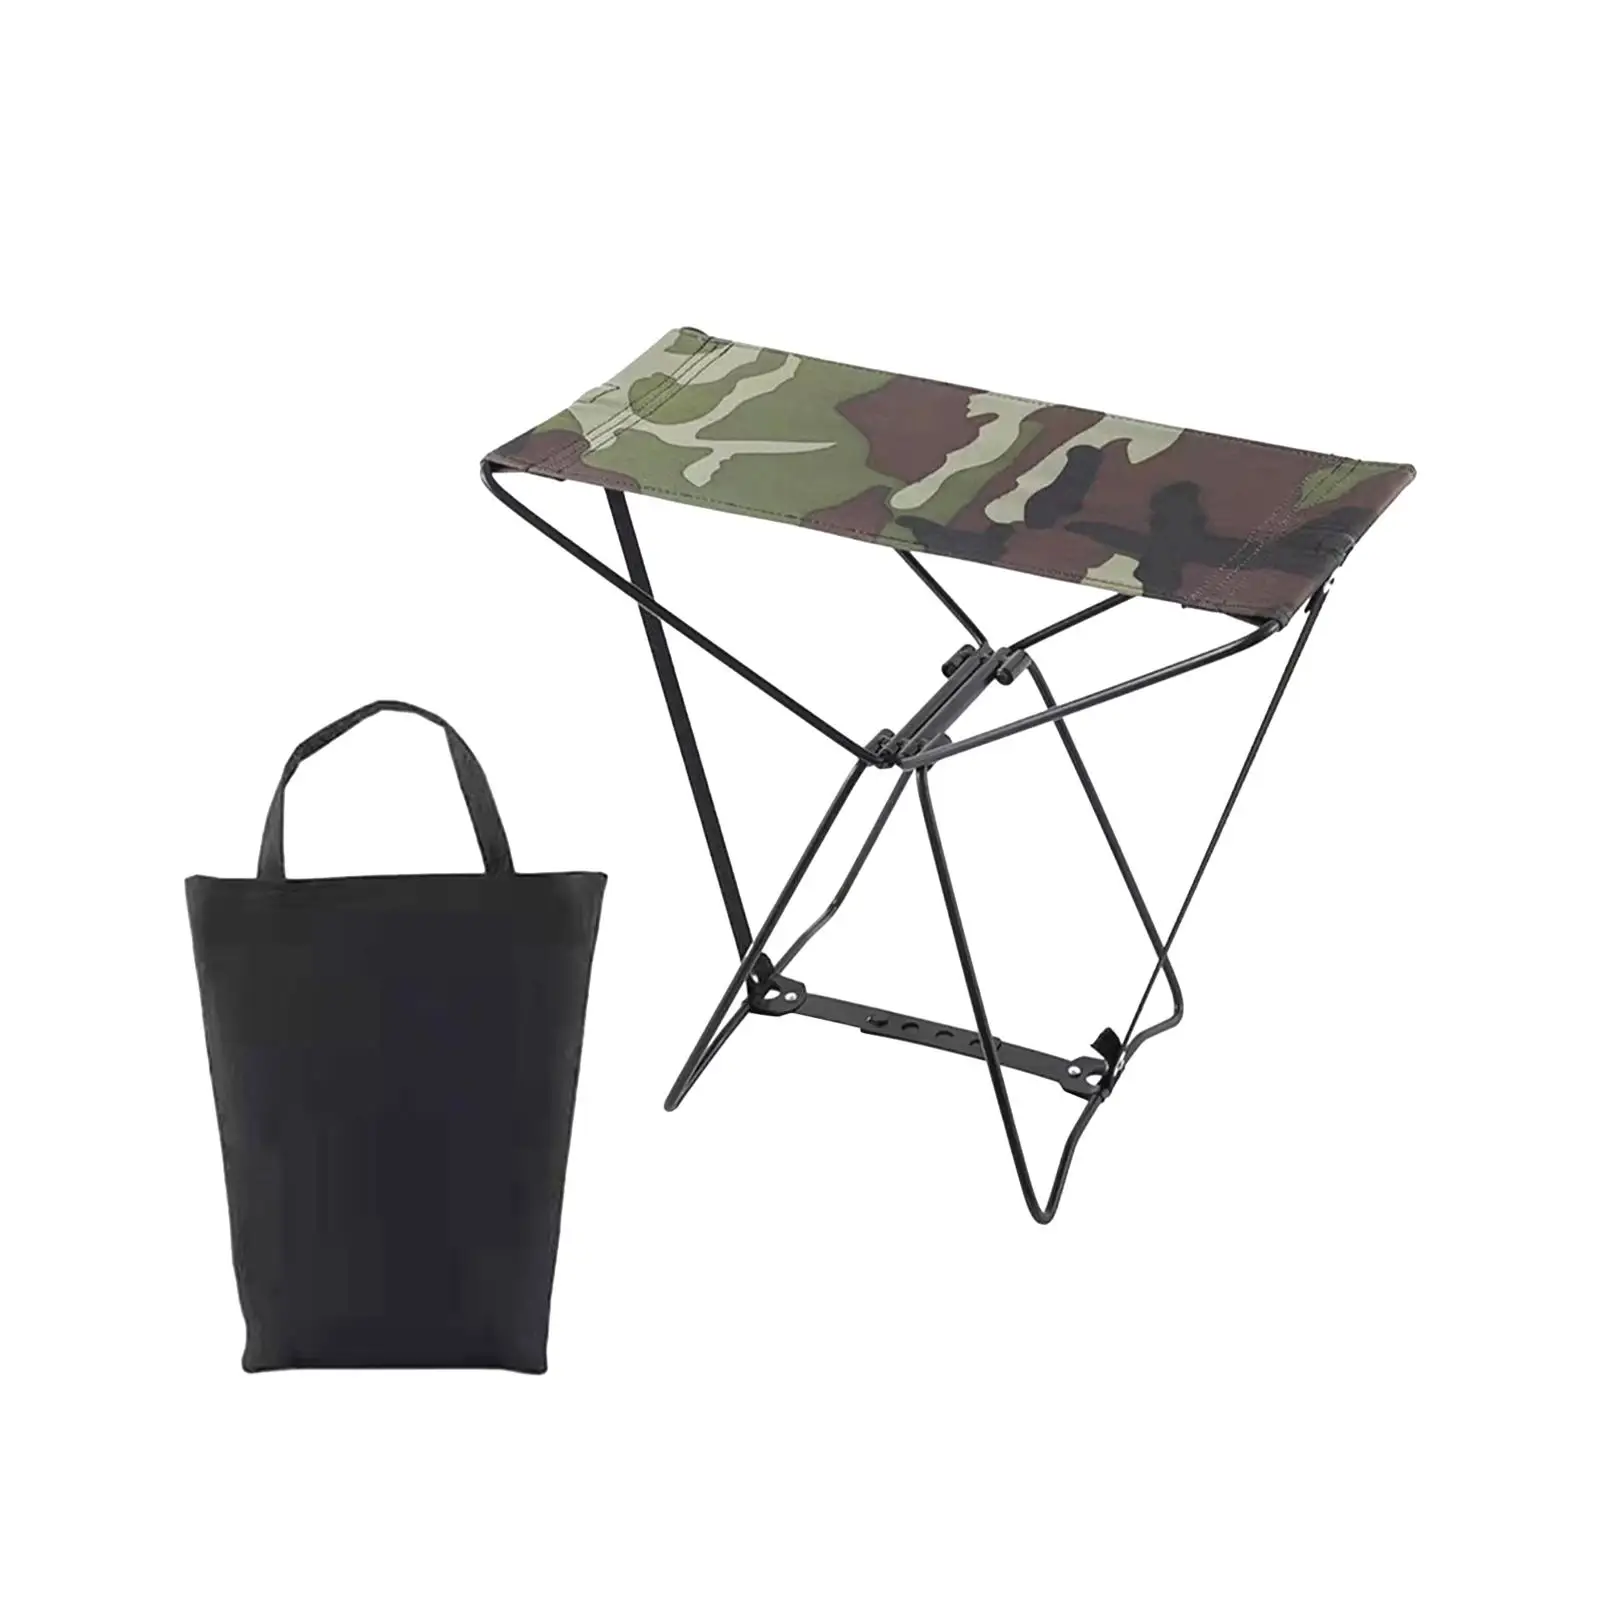 Folding Camping Stool Lightweight Folding Camp Stool Outdoor Foldable Stool Camping Chair for Patio Travel Fishing BBQ Beach